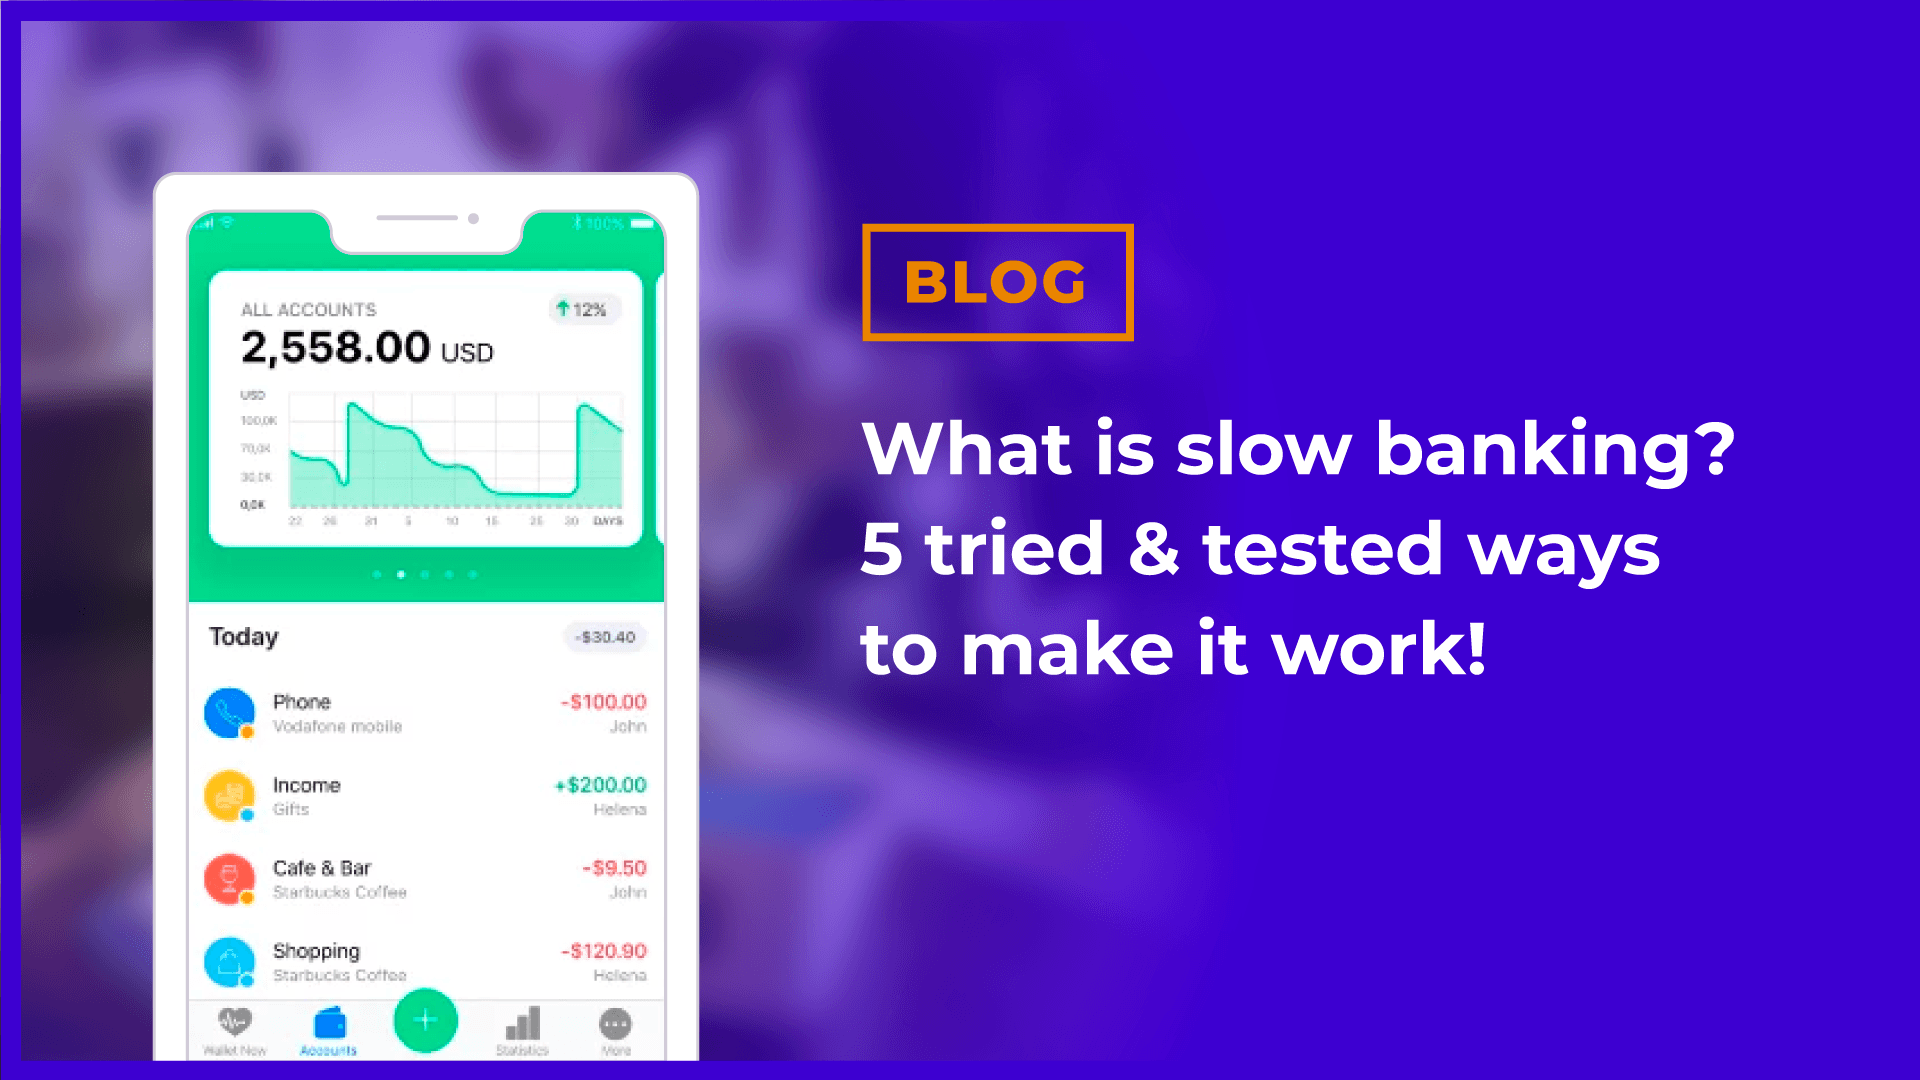 What is slow banking? 5 tried & tested ways to make it work!